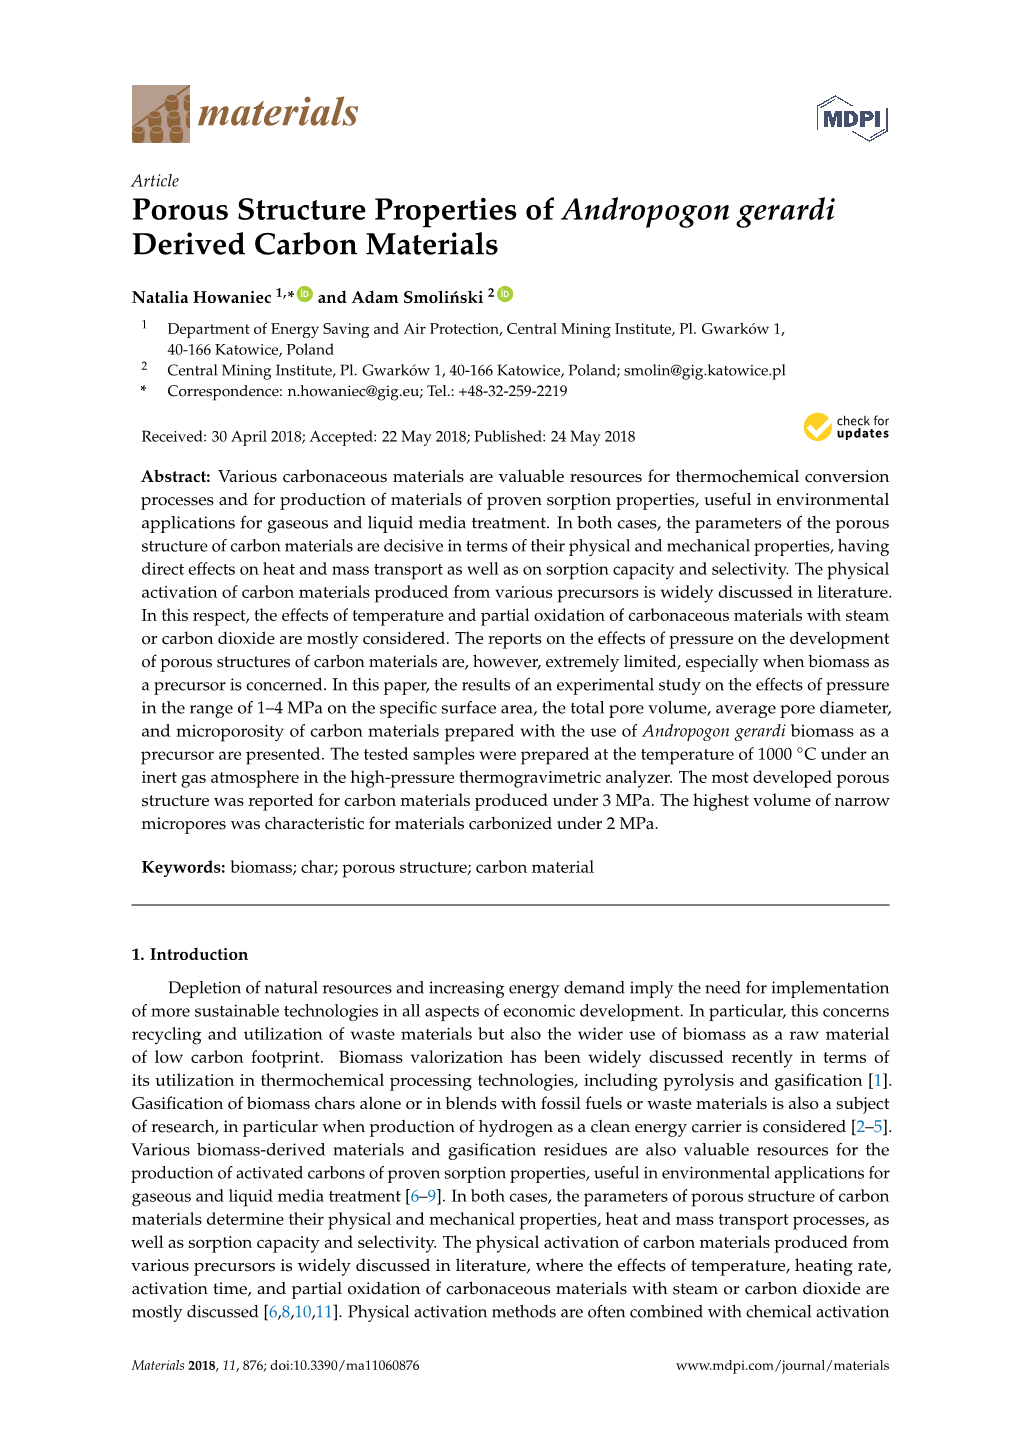 Porous Structure Properties of Andropogon Gerardi Derived Carbon Materials